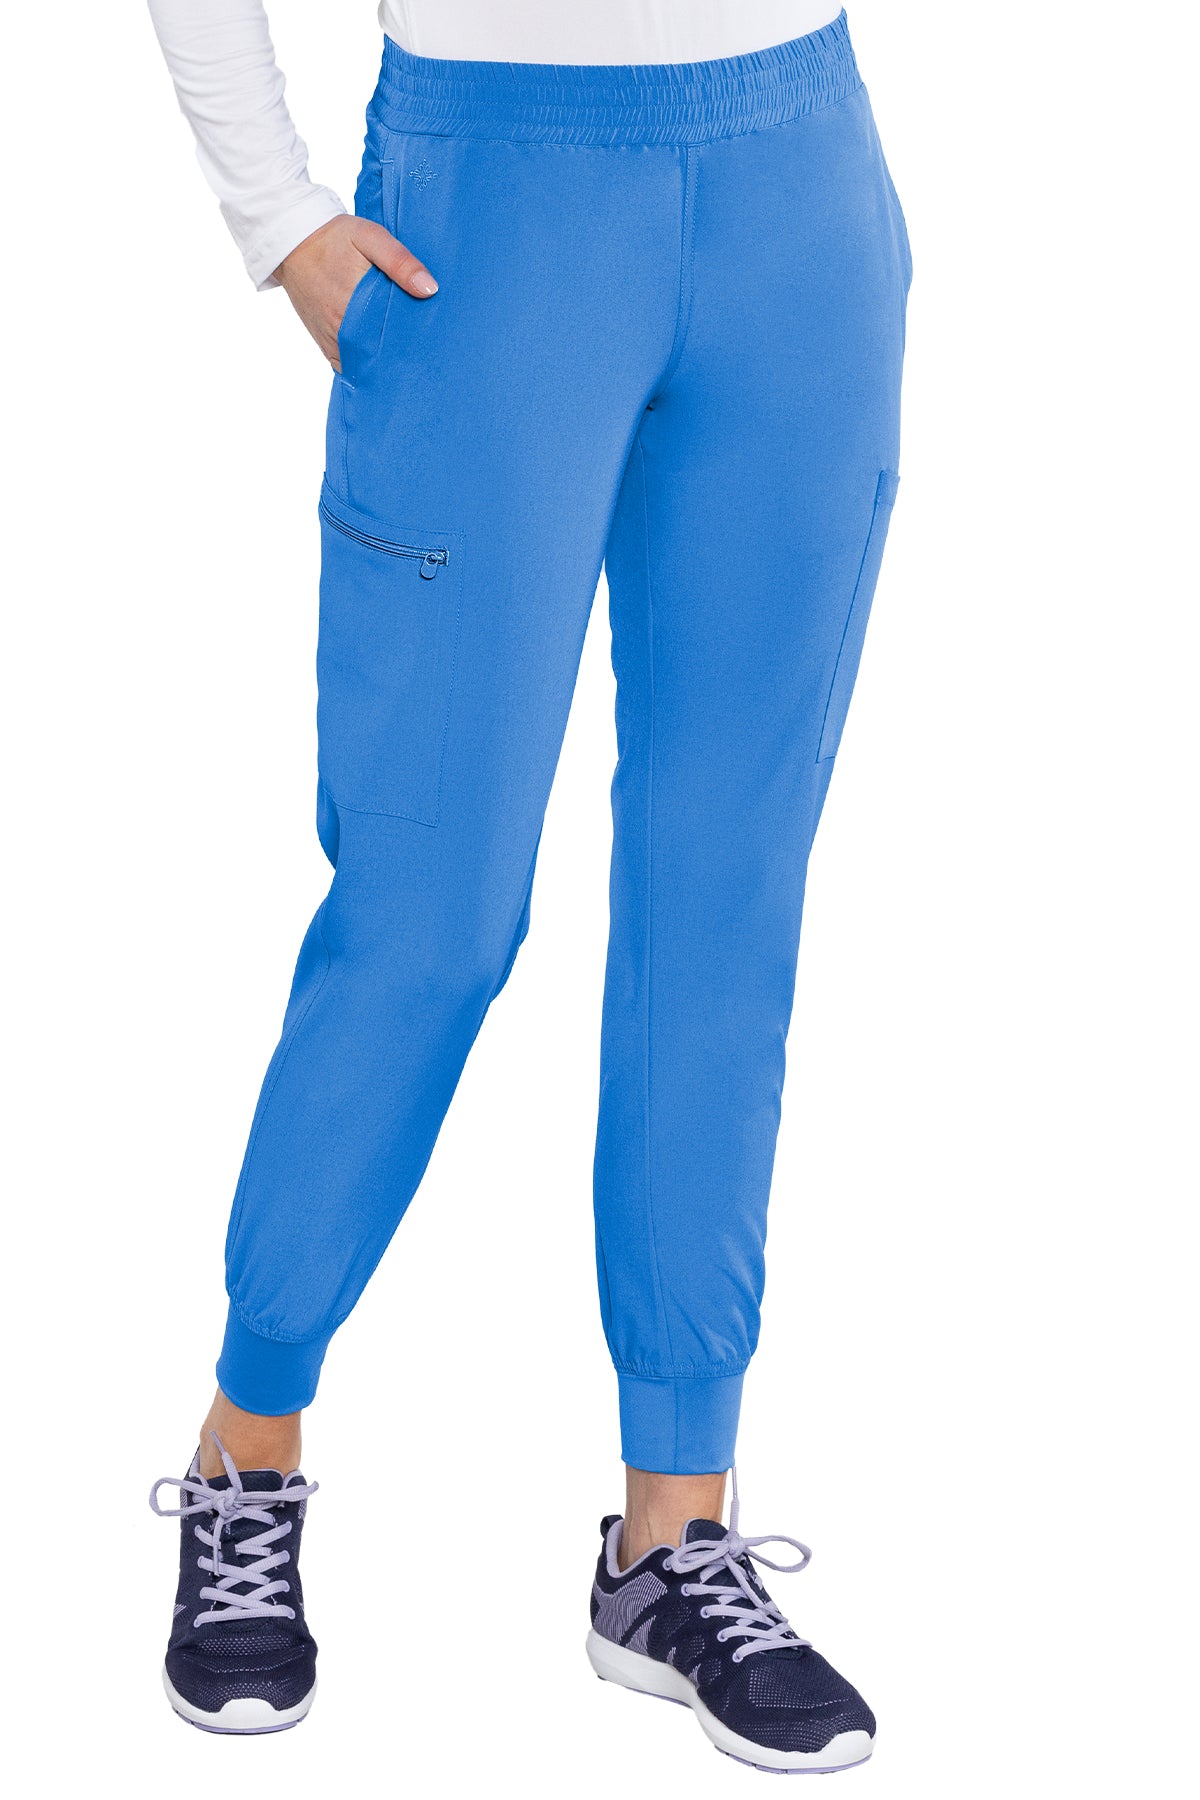 MED COUTURE Smocked Waist Jogger #8739 - Butterfly Touch Scrubs